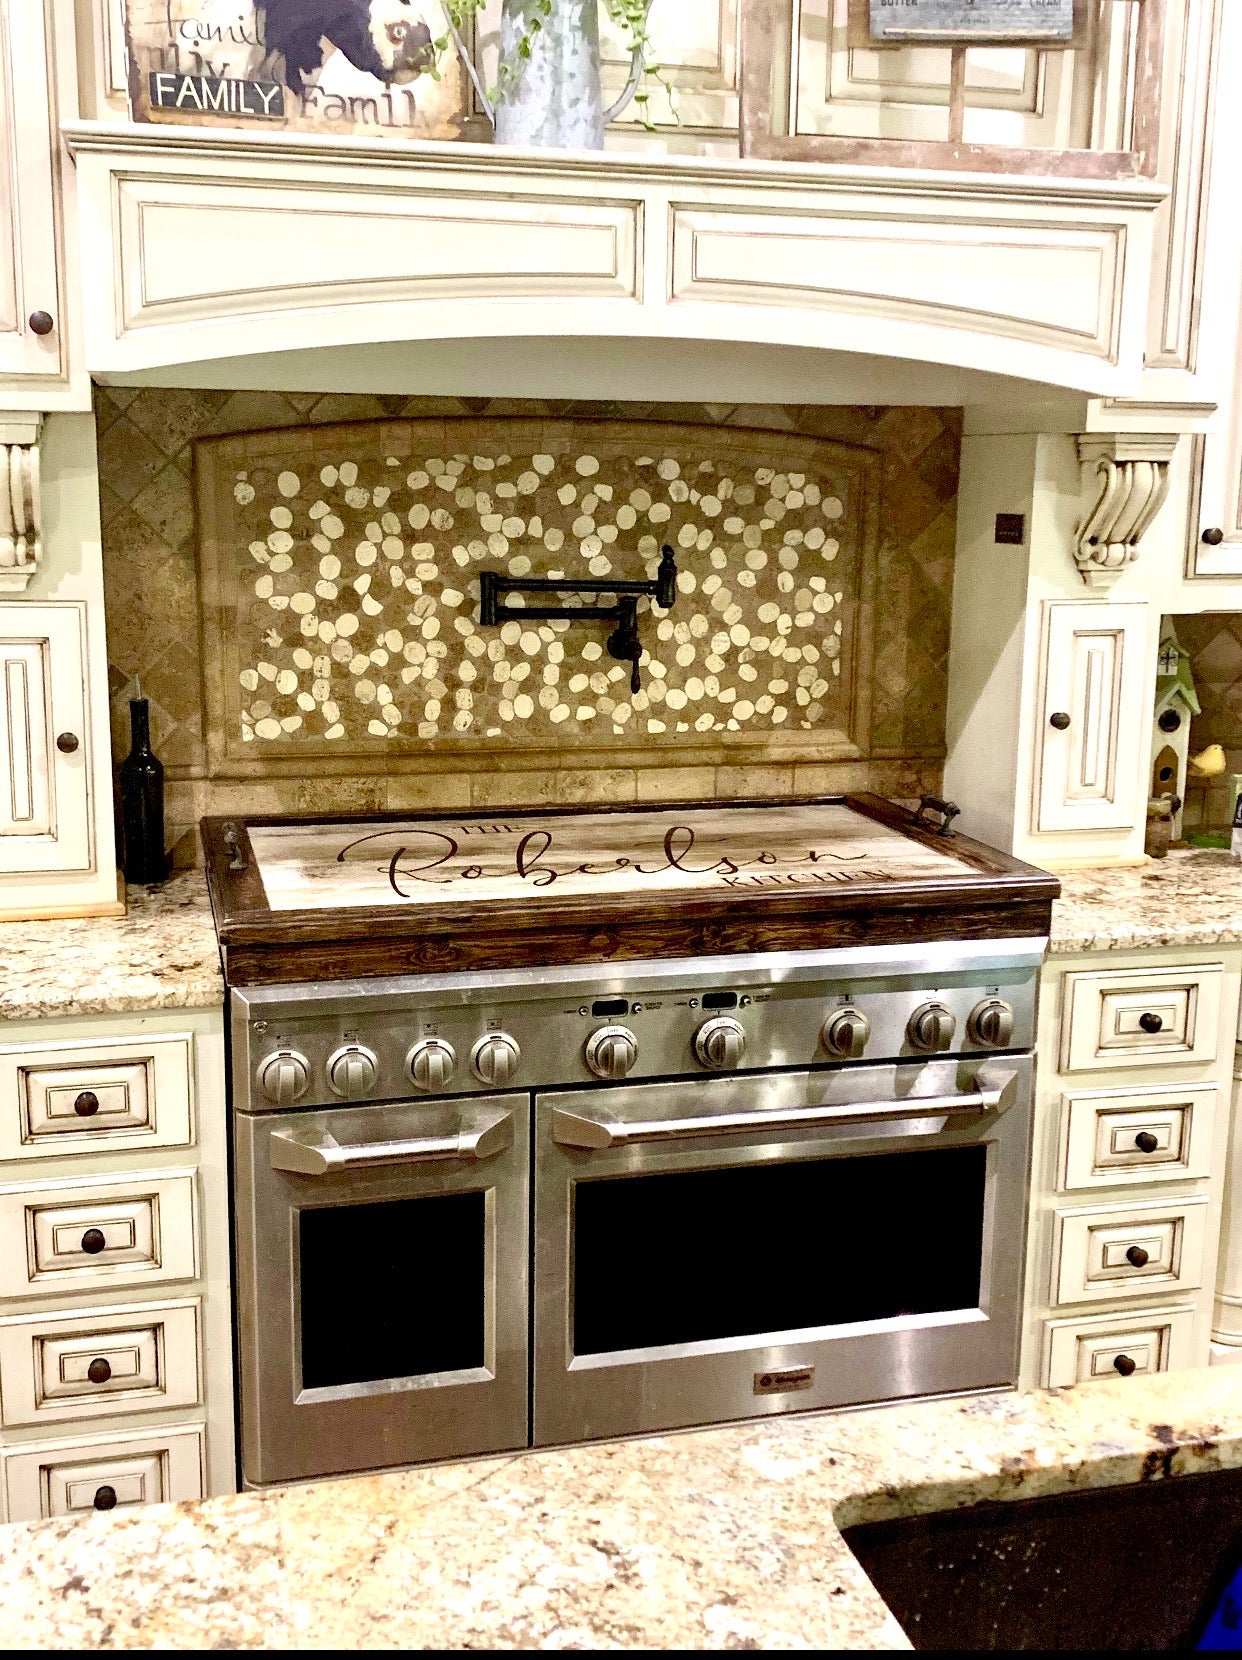 Stove top covers - TaylorSigns